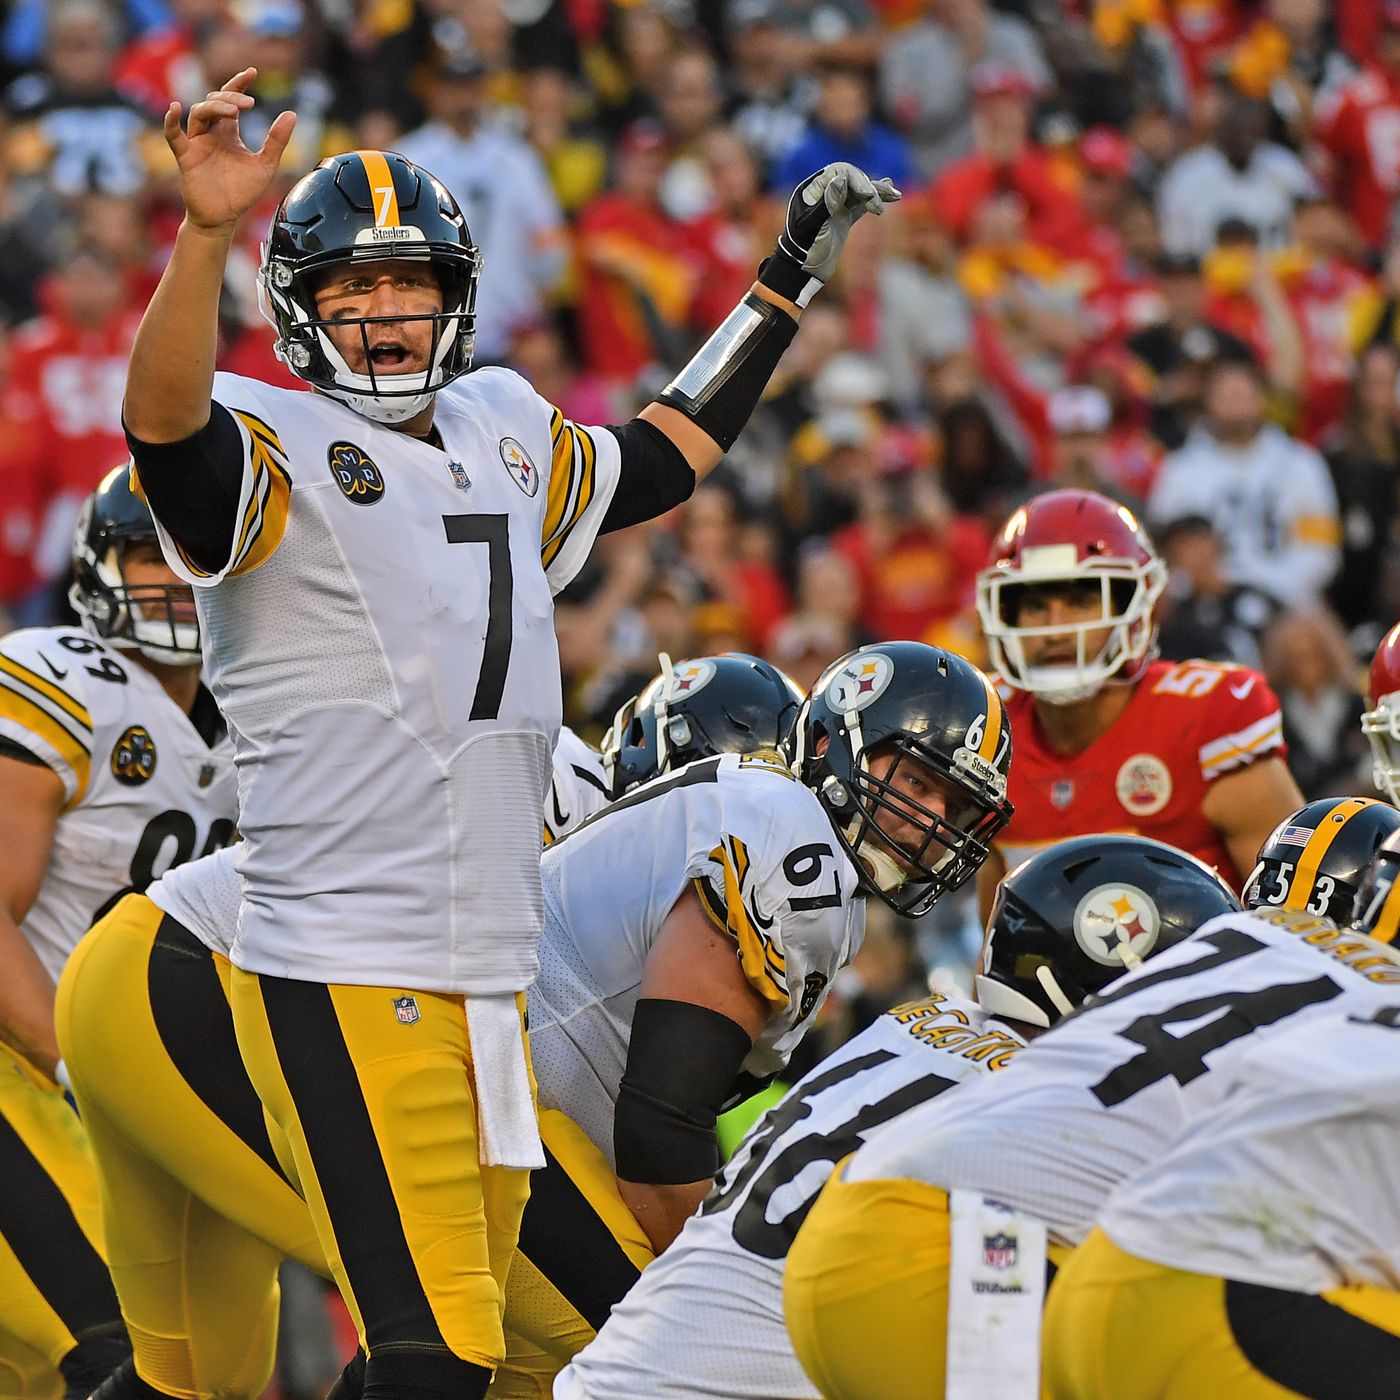 Chiefs vs Steelers 2021: game time, TV schedule, odds, how to